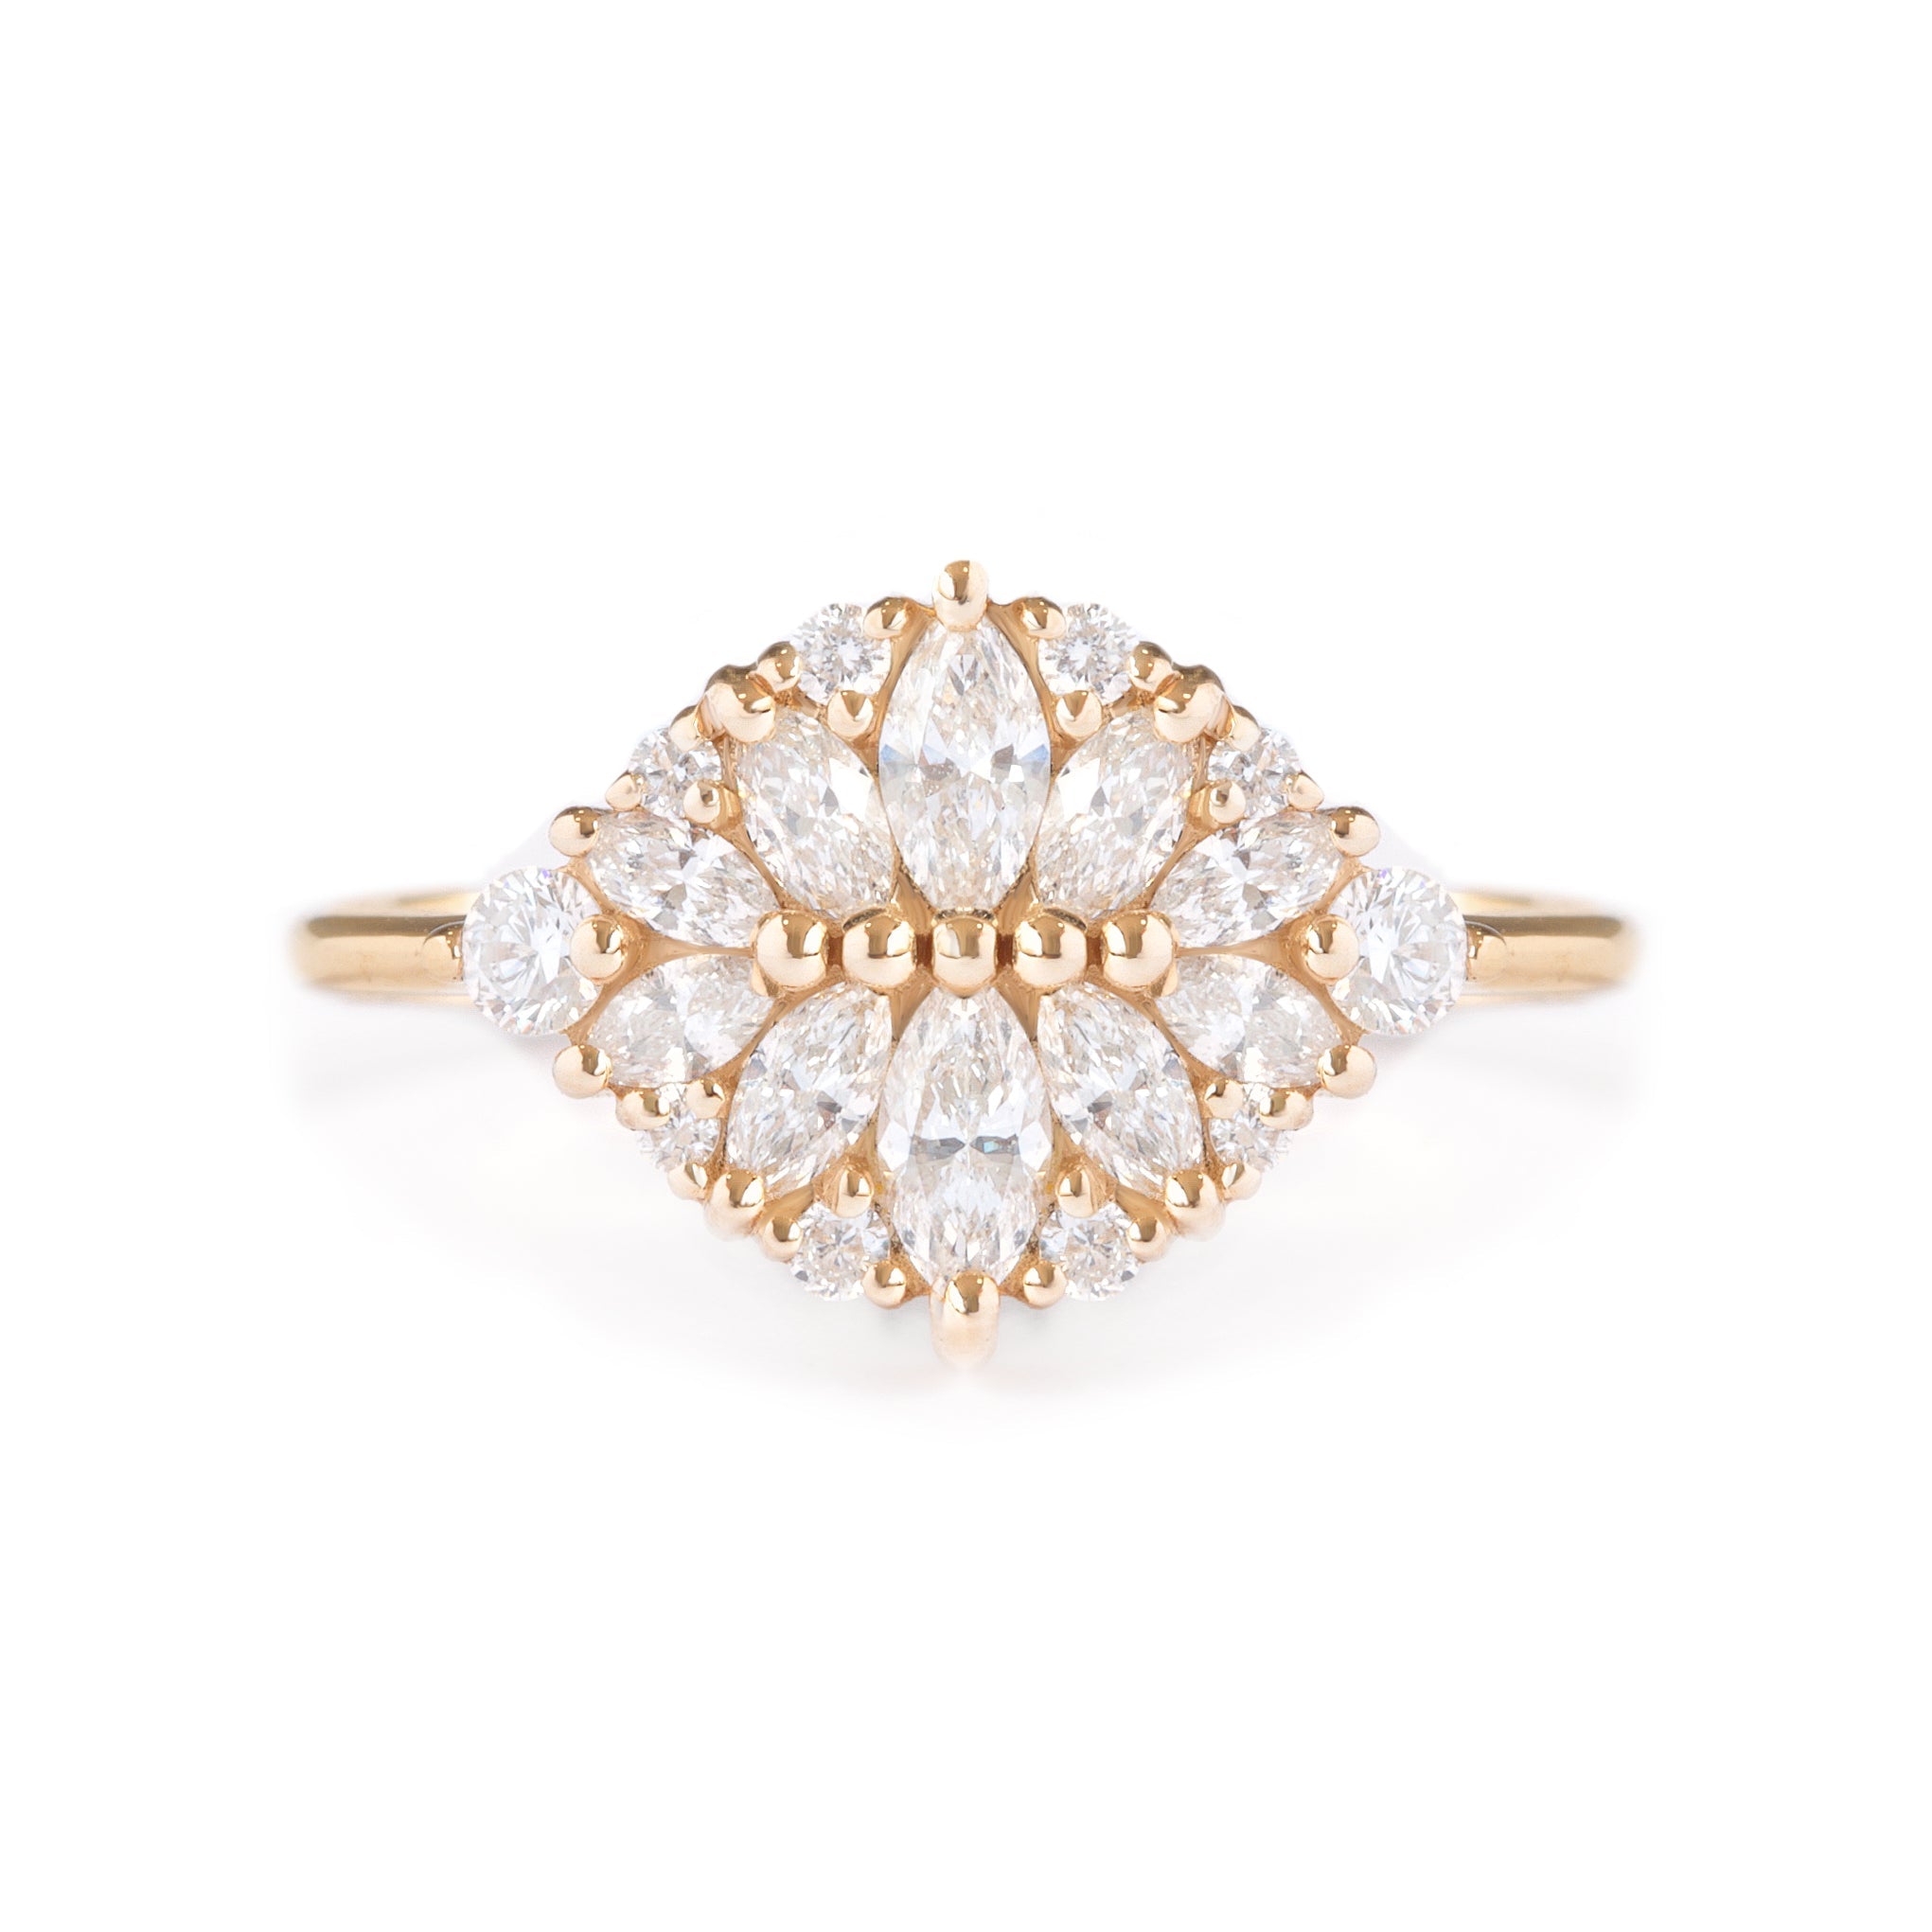 Cluster Marquise Diamond Alternative Engagement Ring - Reflections, 14K Yellow Gold, READY TO SHIP! ♥